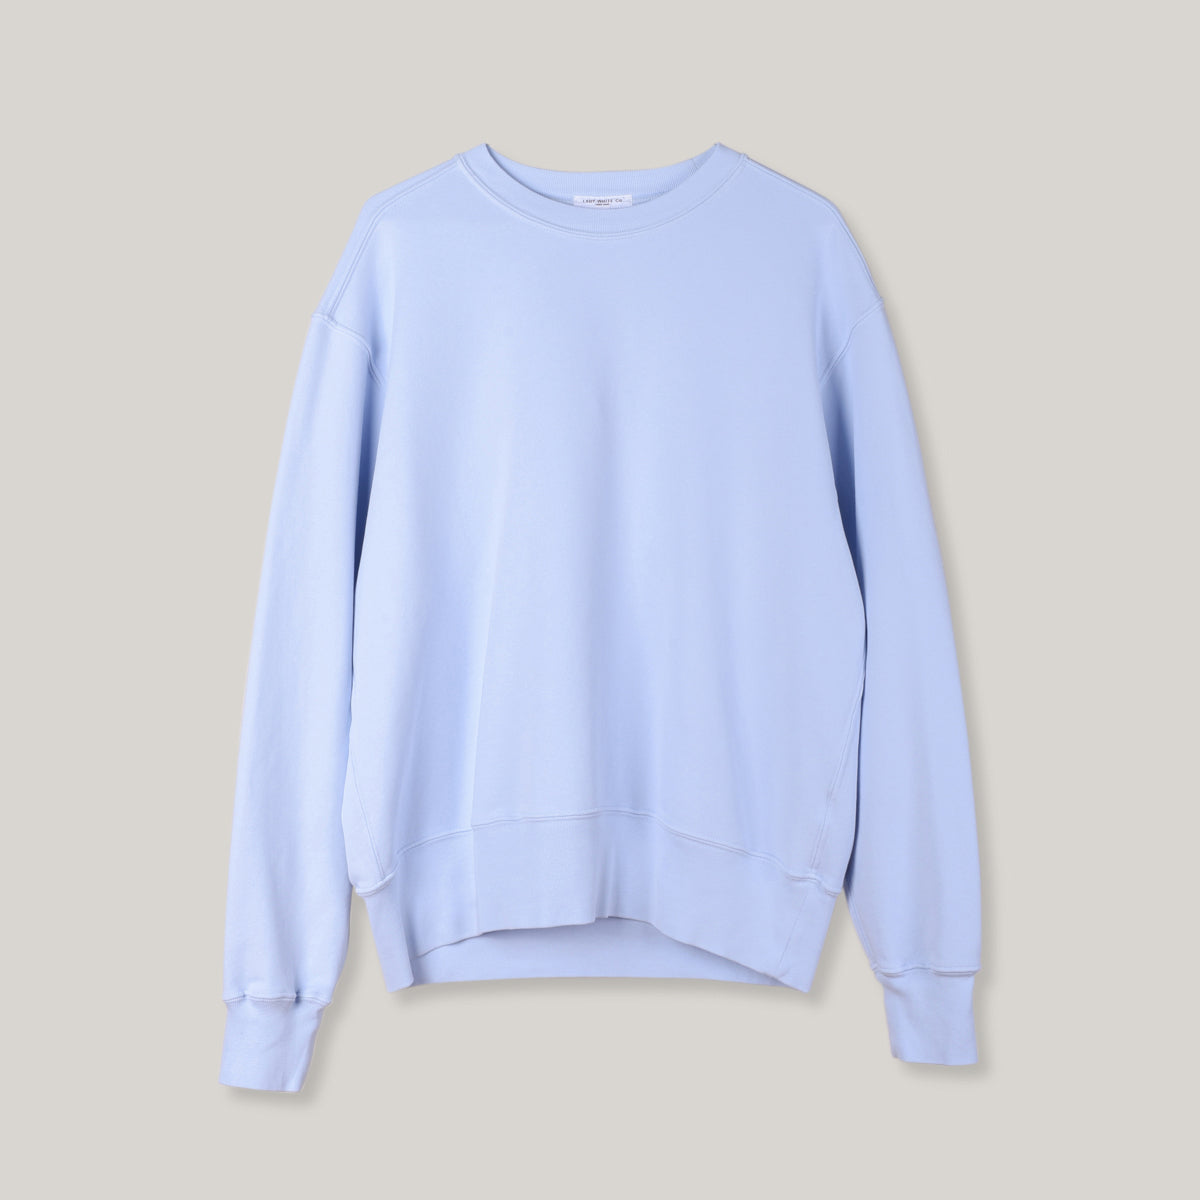 LADY WHITE CO. RELAXED SWEATSHIRT - PALE BLUE